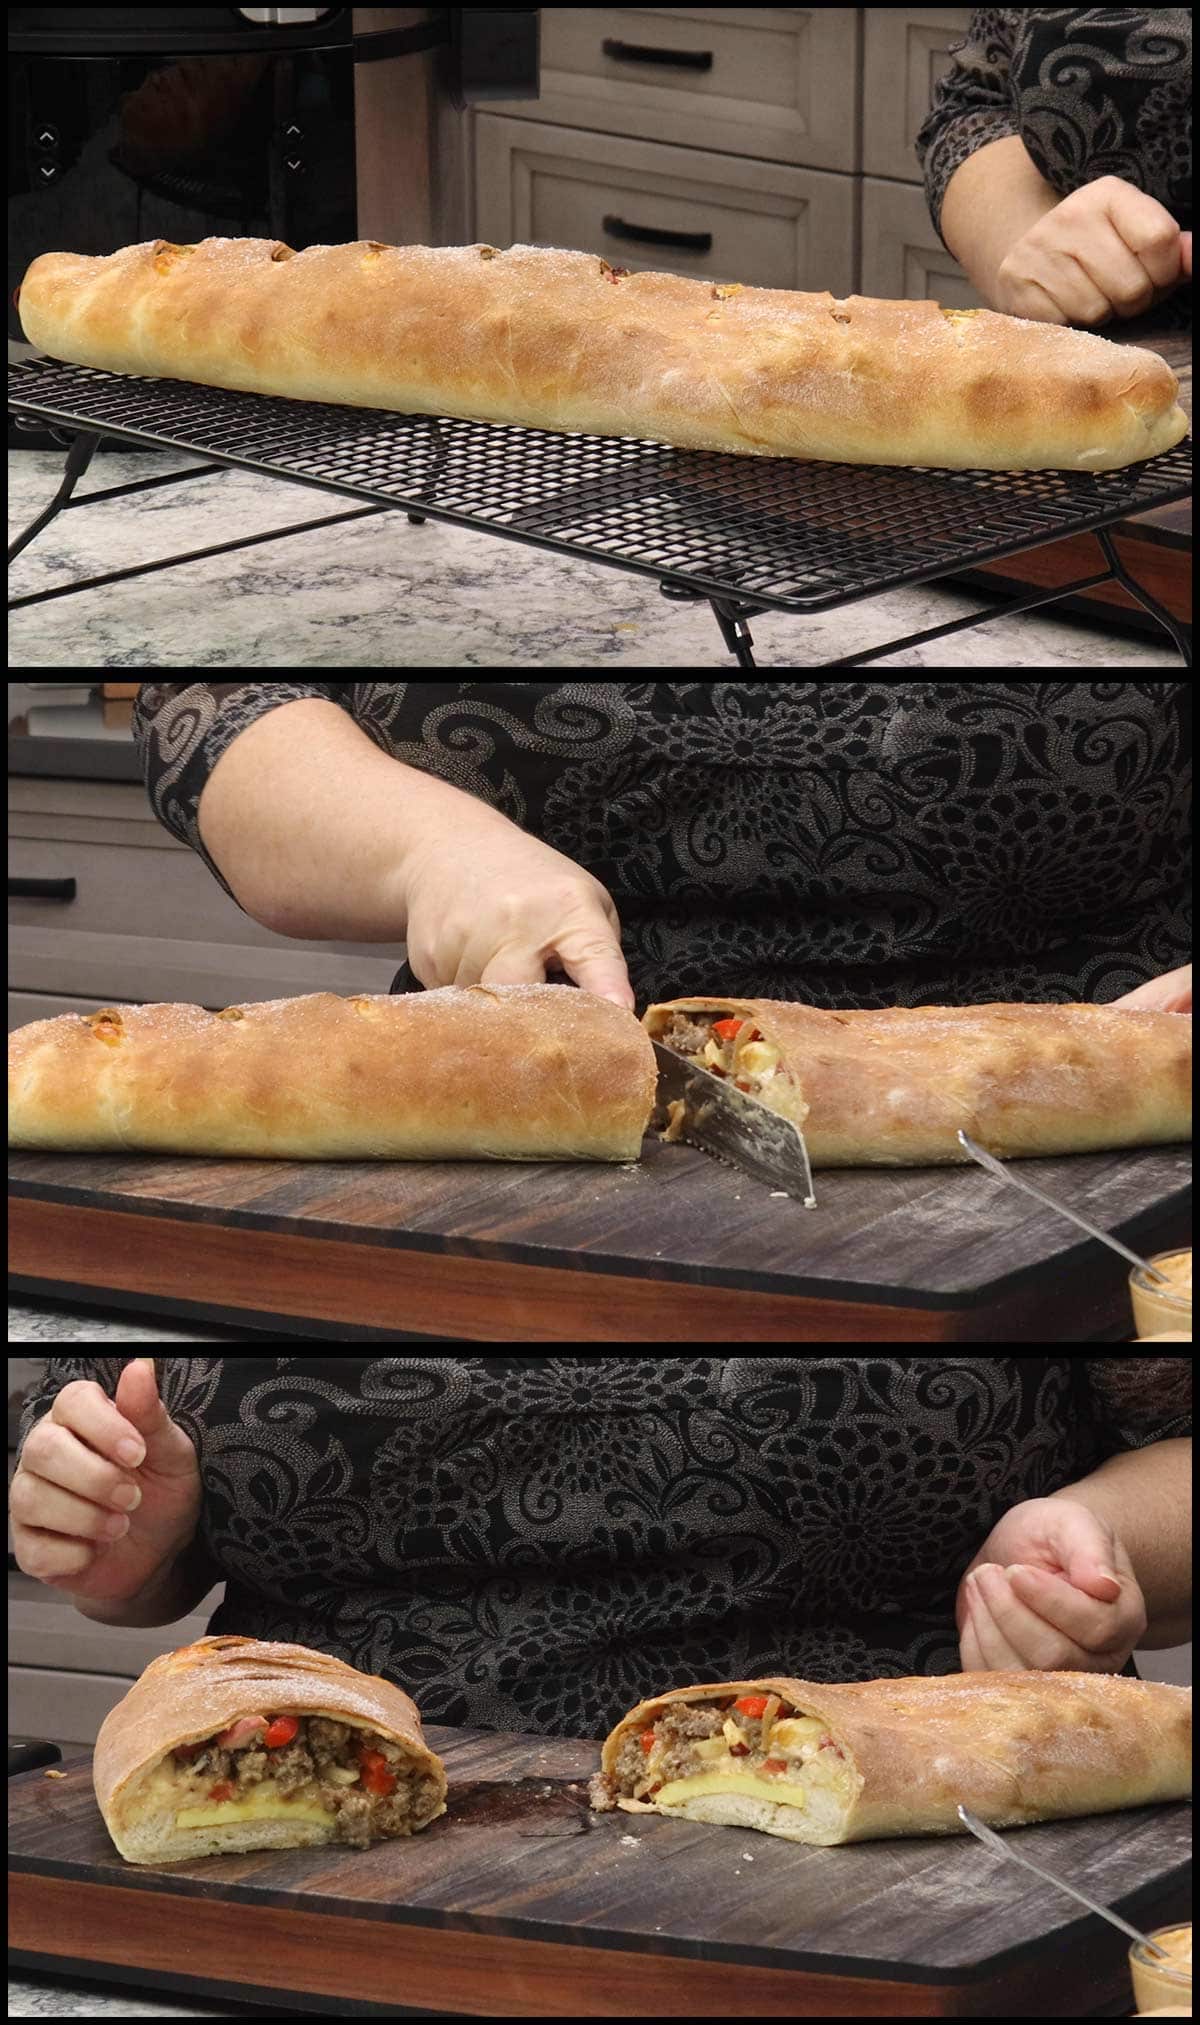 stromboli being cut in half for serving.